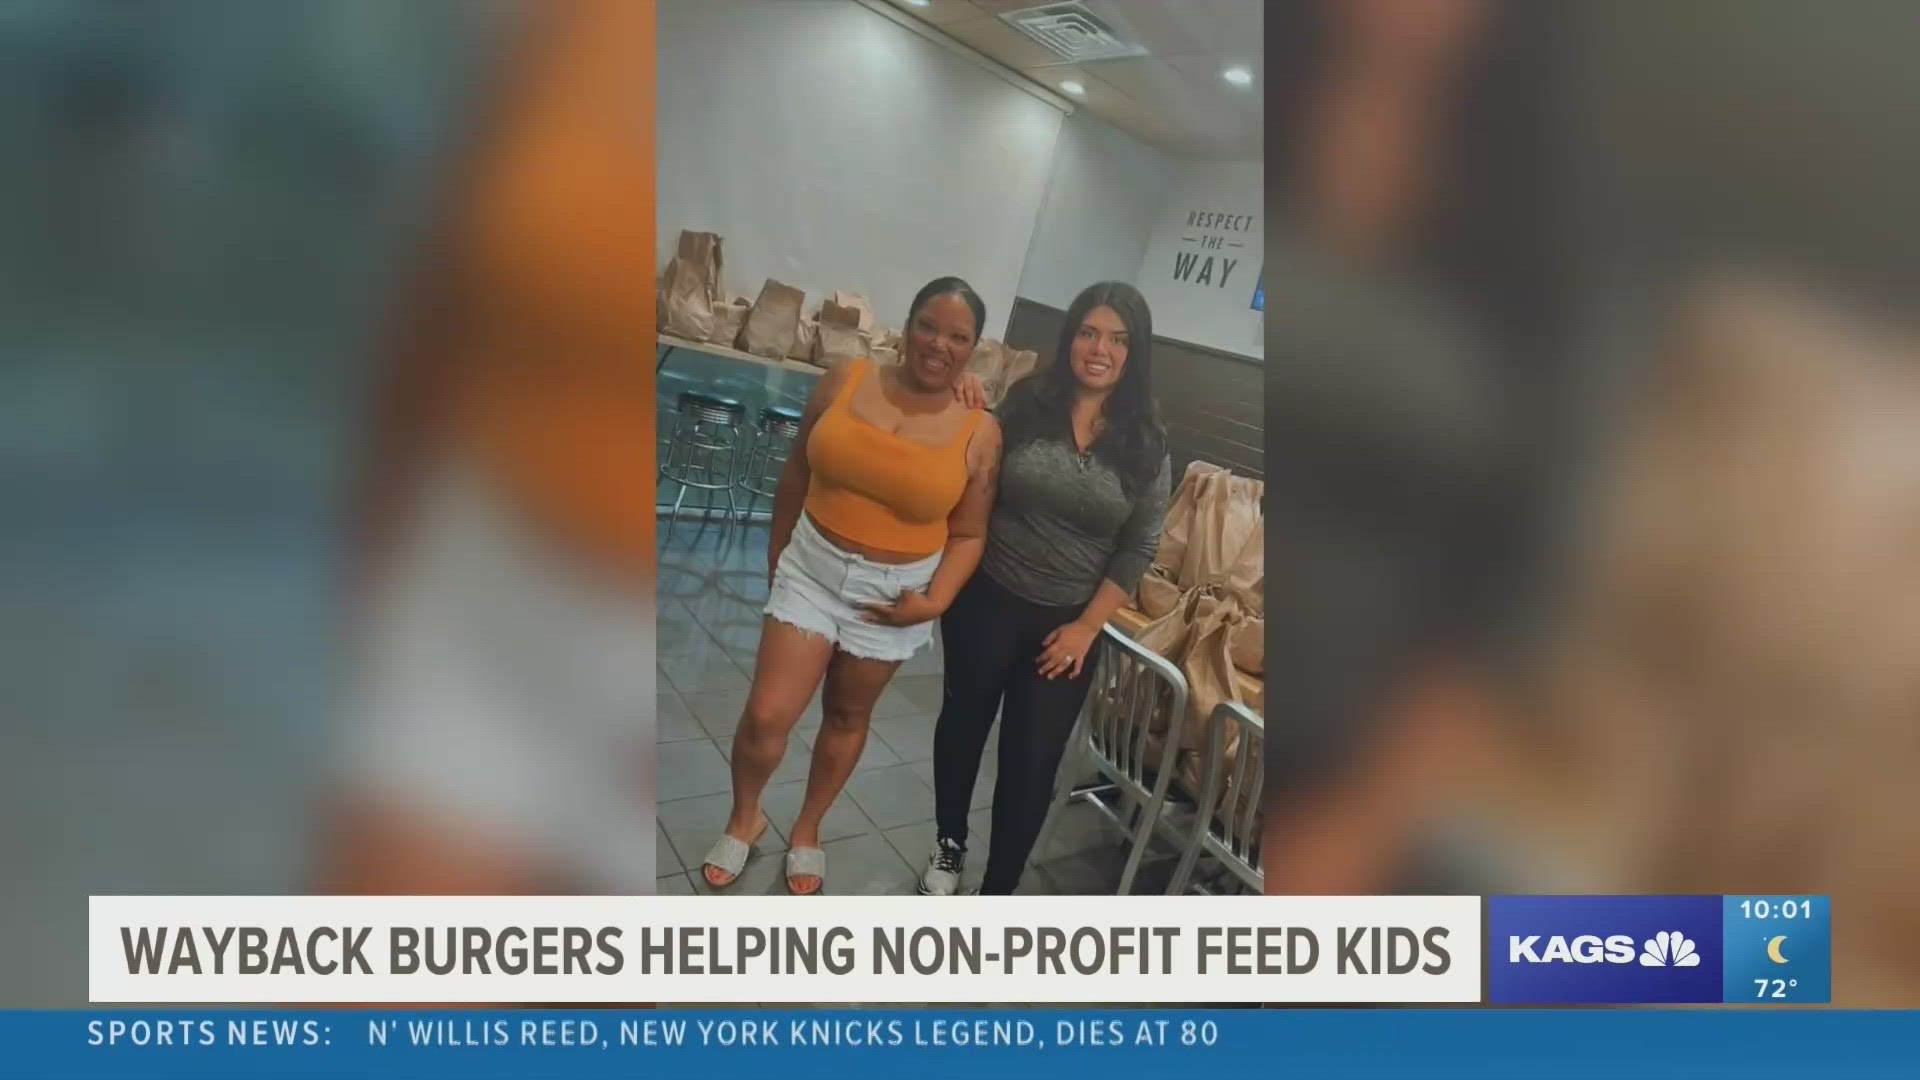 Anointed Abilities, a youth social program in the Brazos Valley, has partnered with Wayback Burgers to help feed kids in their summer program.